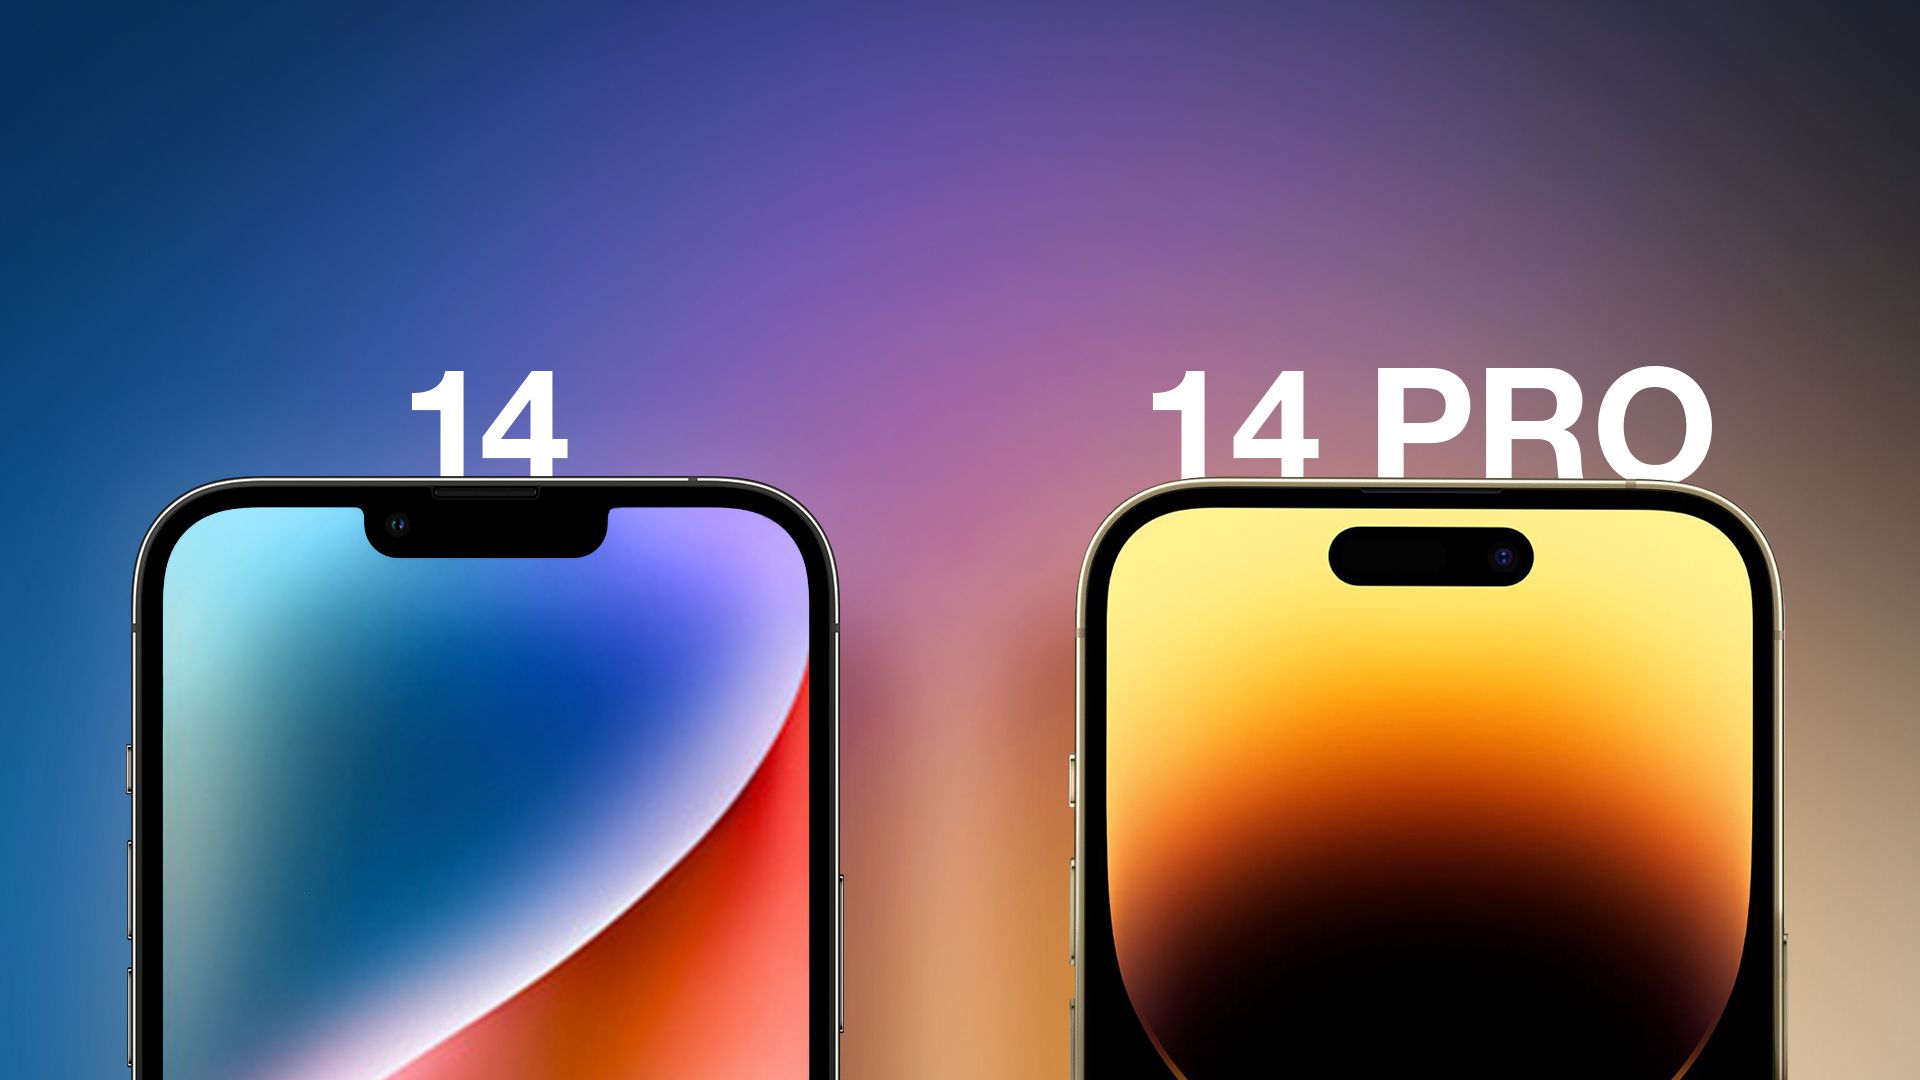 Apple iPhone 14 Pro and Pro Max: Photos, Features, Specs